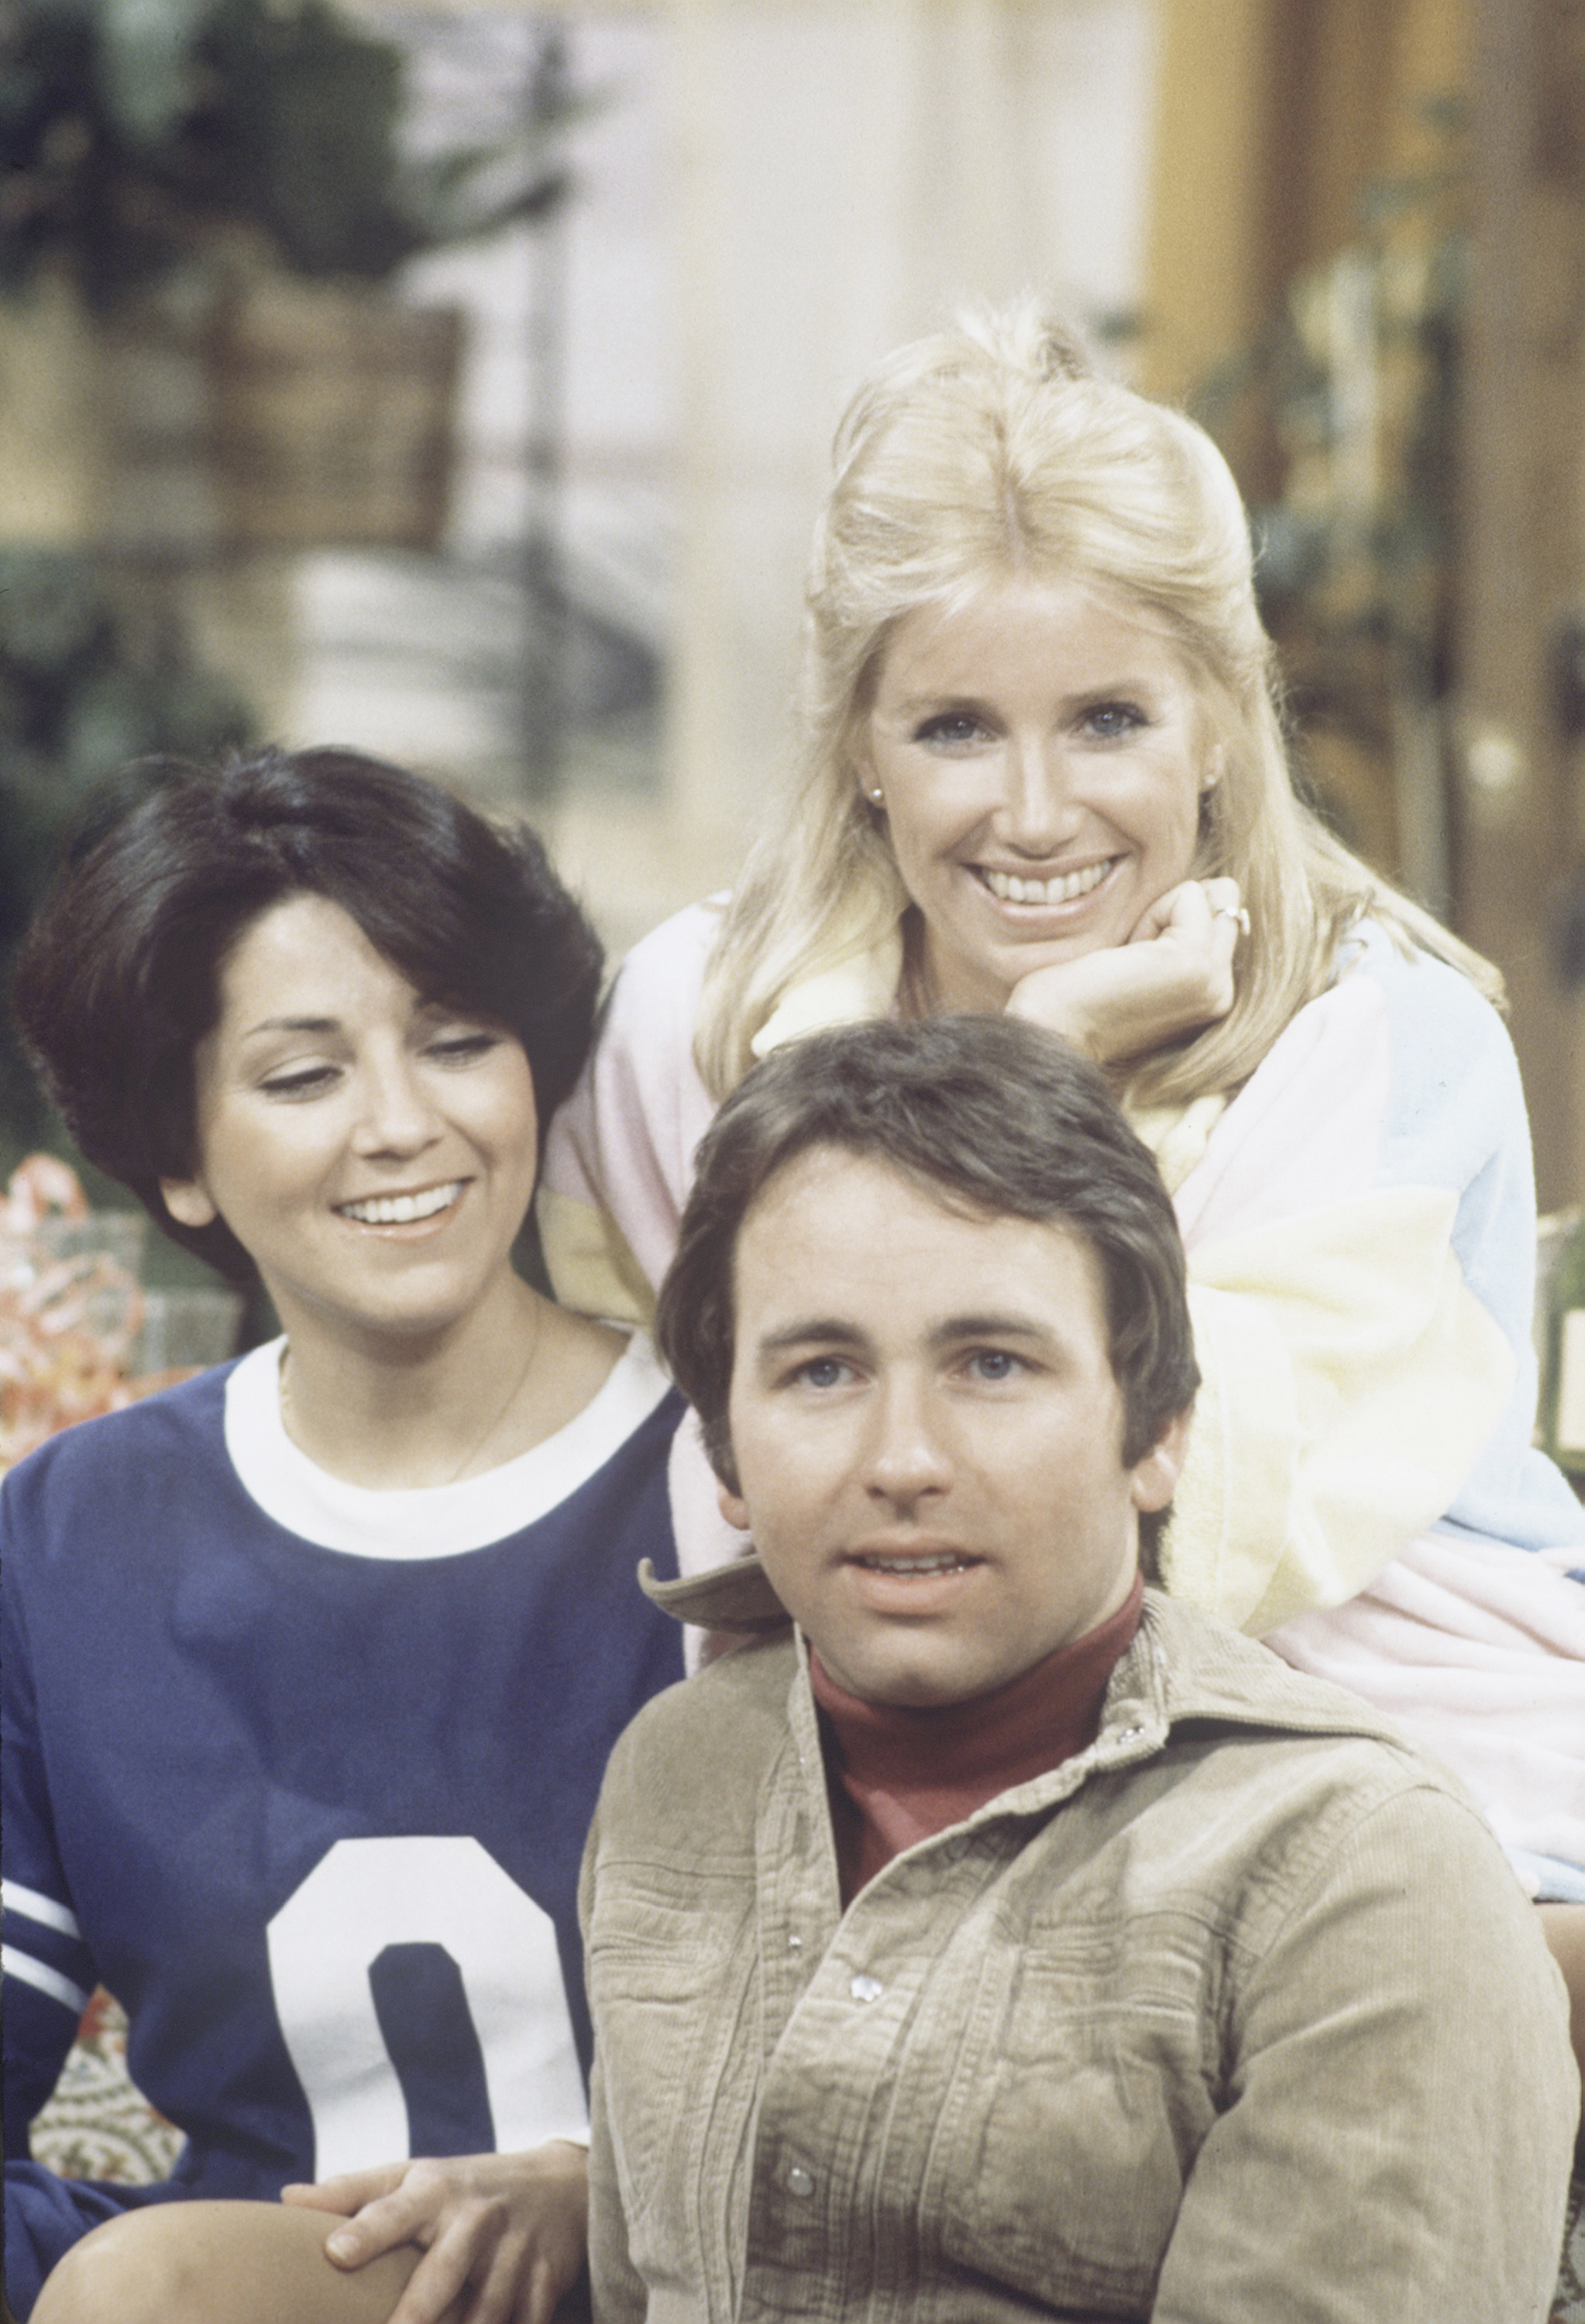 Joyce DeWitt, John Ritter, and Suzanne Somers in California in 1977 | Source: Getty Images